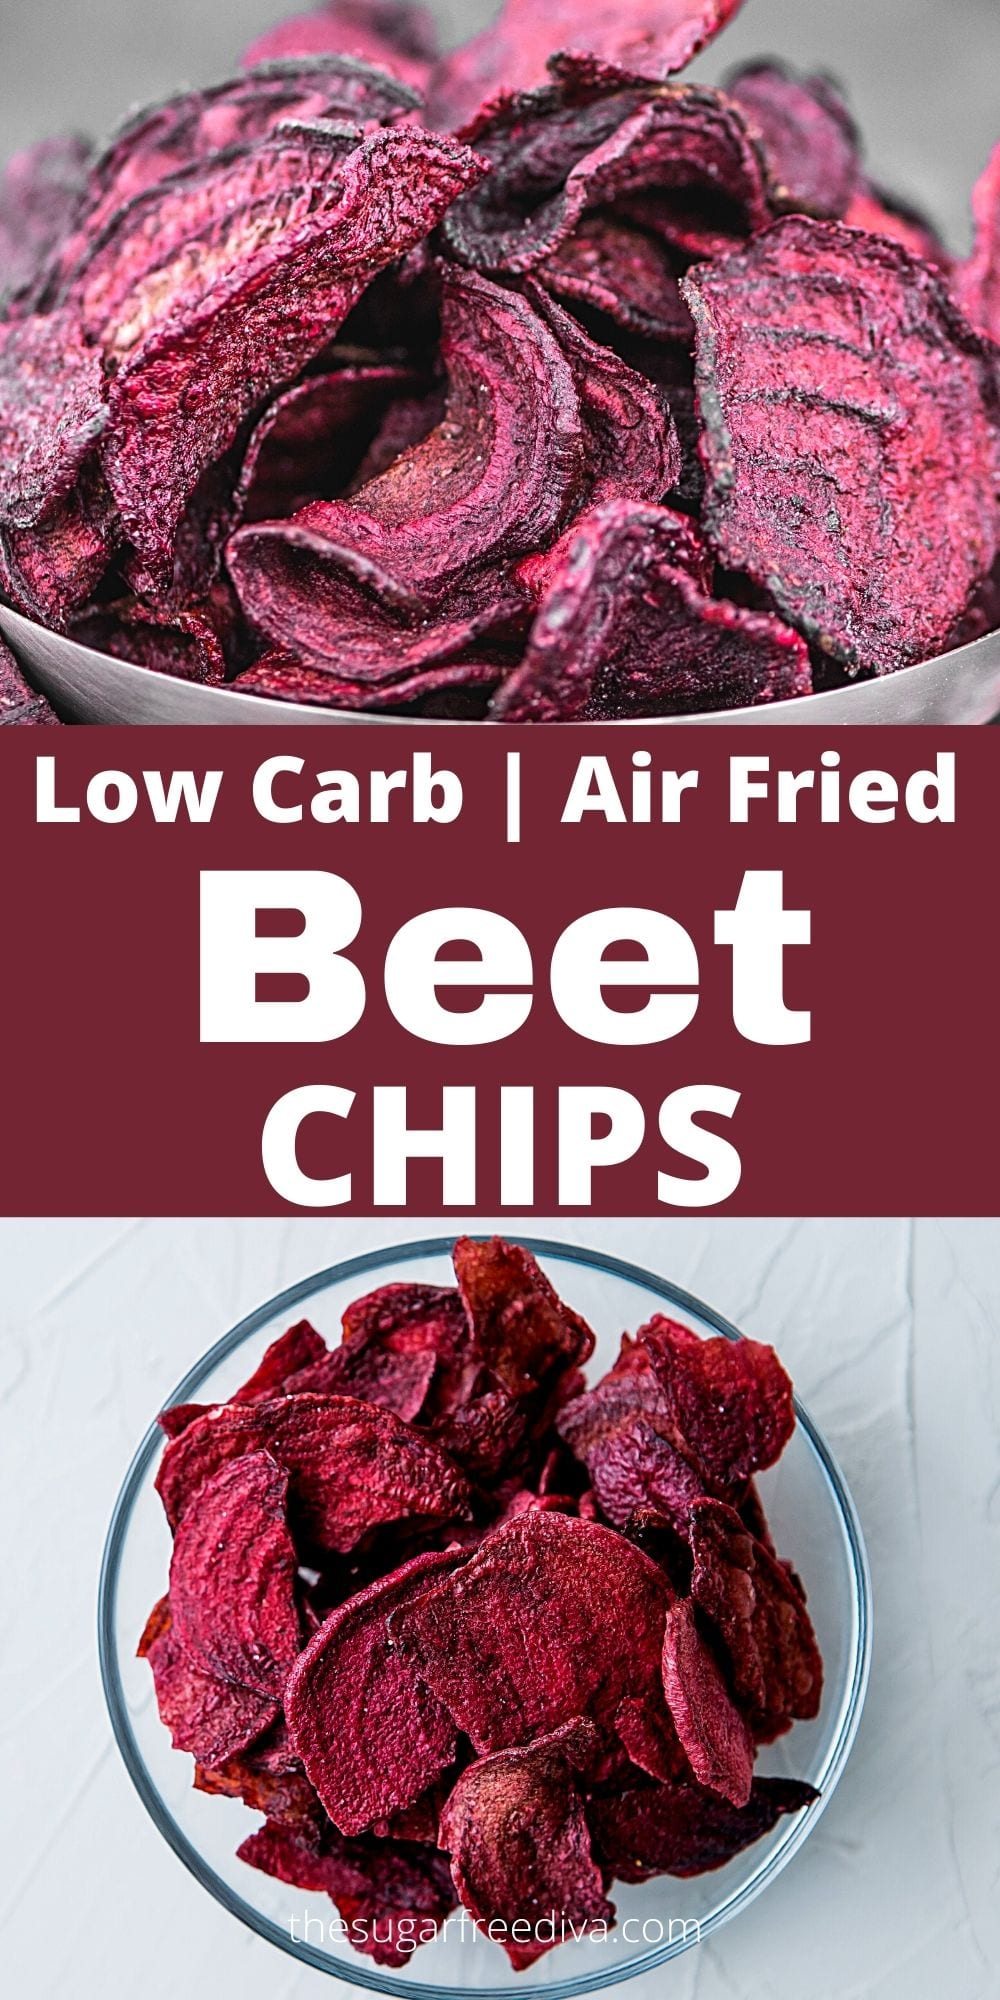 Low Carb Air Fried Beet Chips